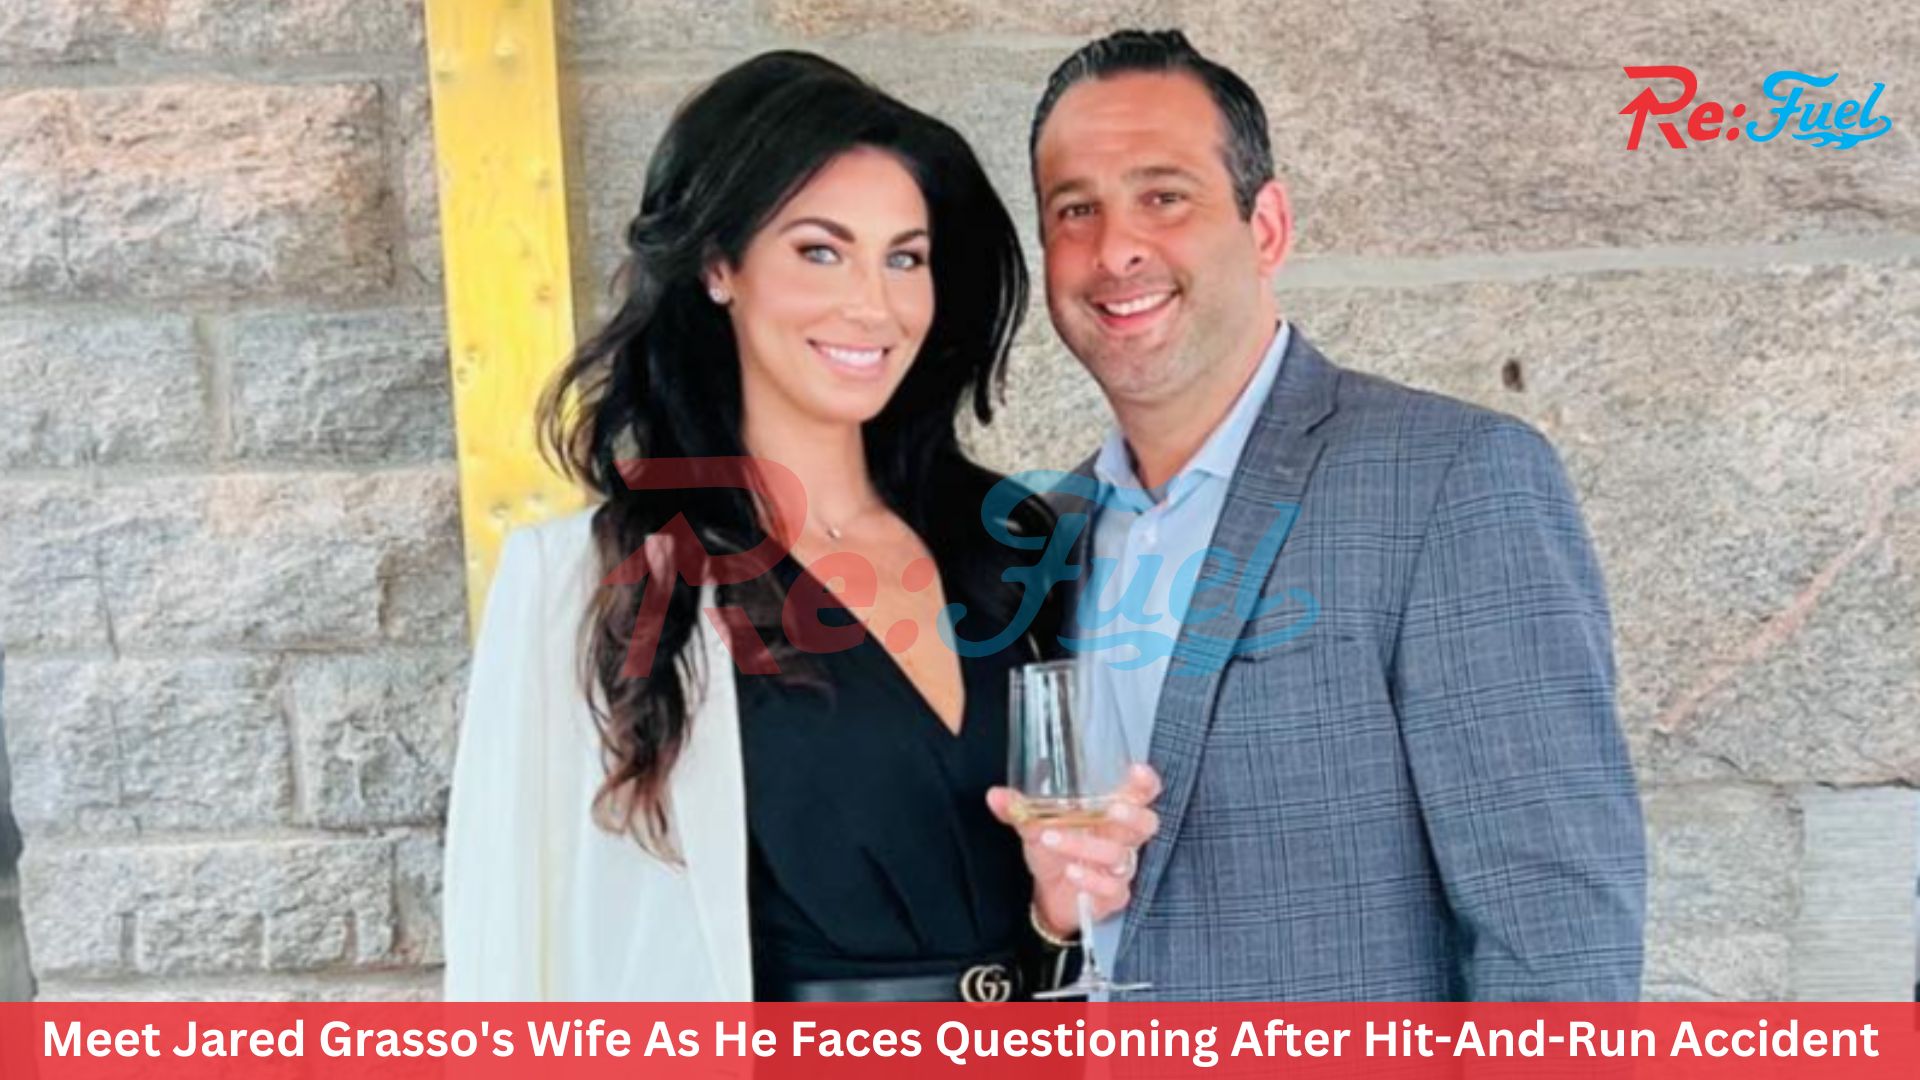 Meet Jared Grasso's Wife As He Faces Questioning After Hit-And-Run Accident